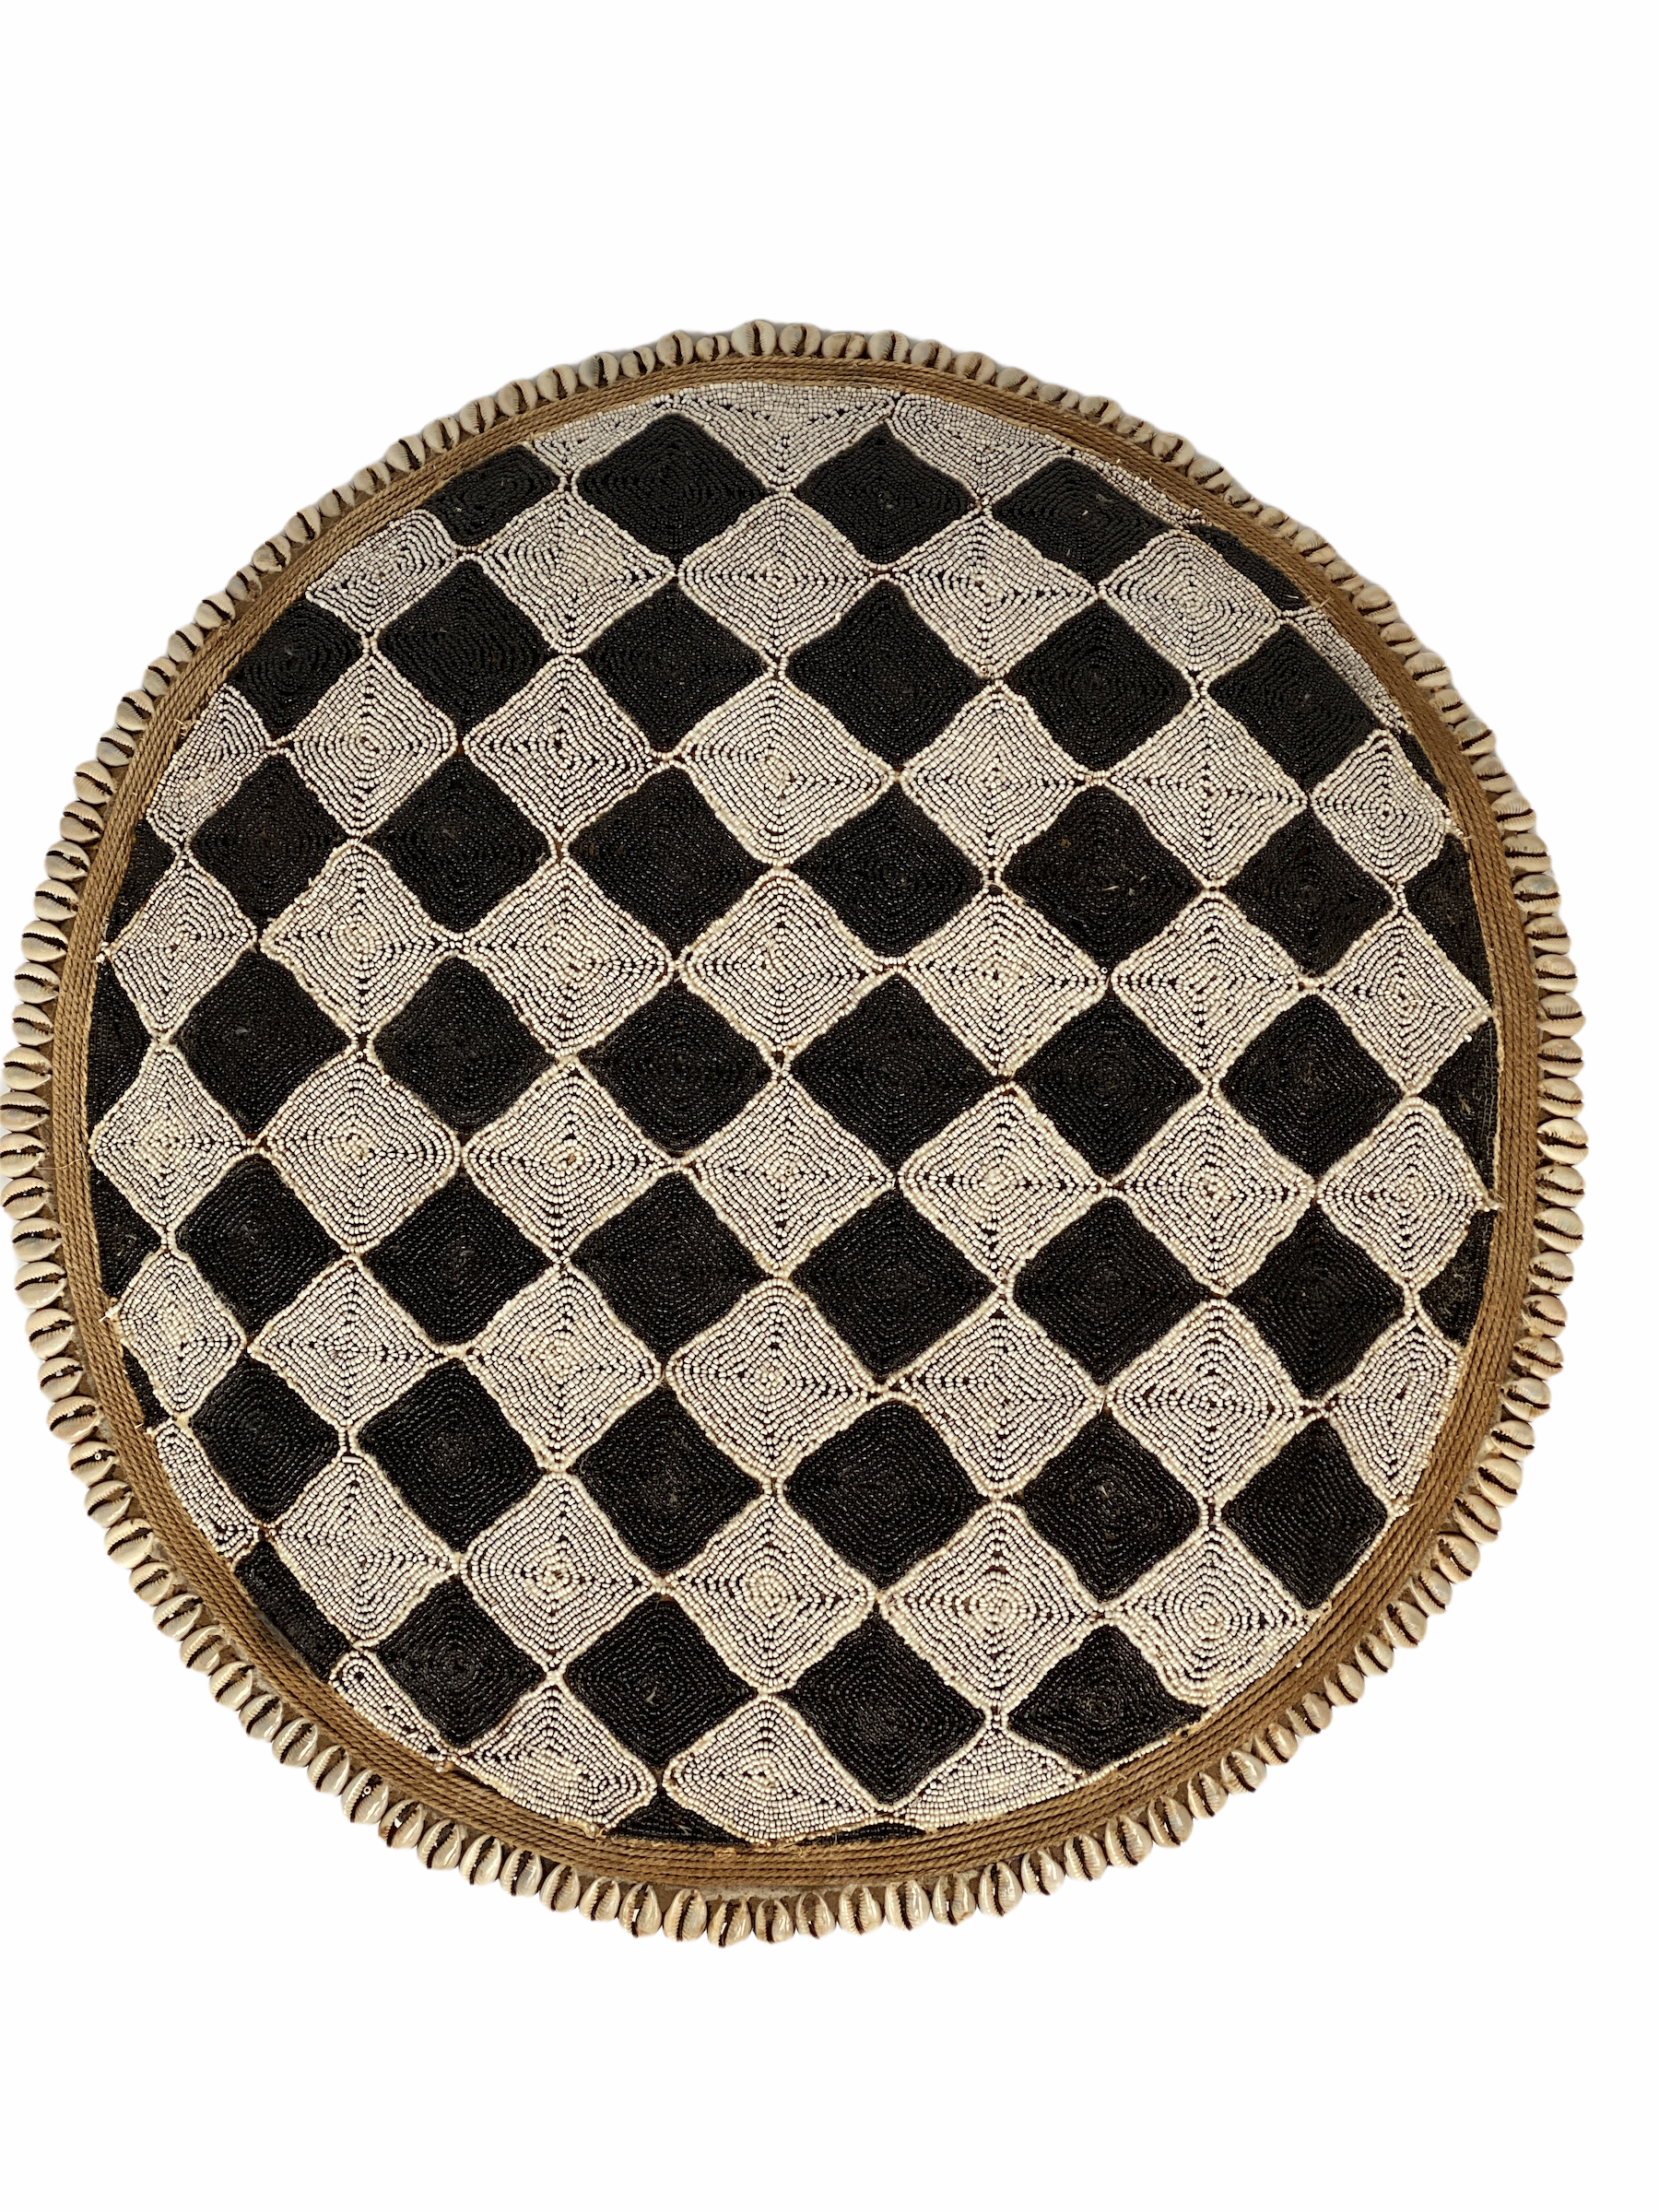 Cameroon Beaded Shield CW07- L - 55cm black and white